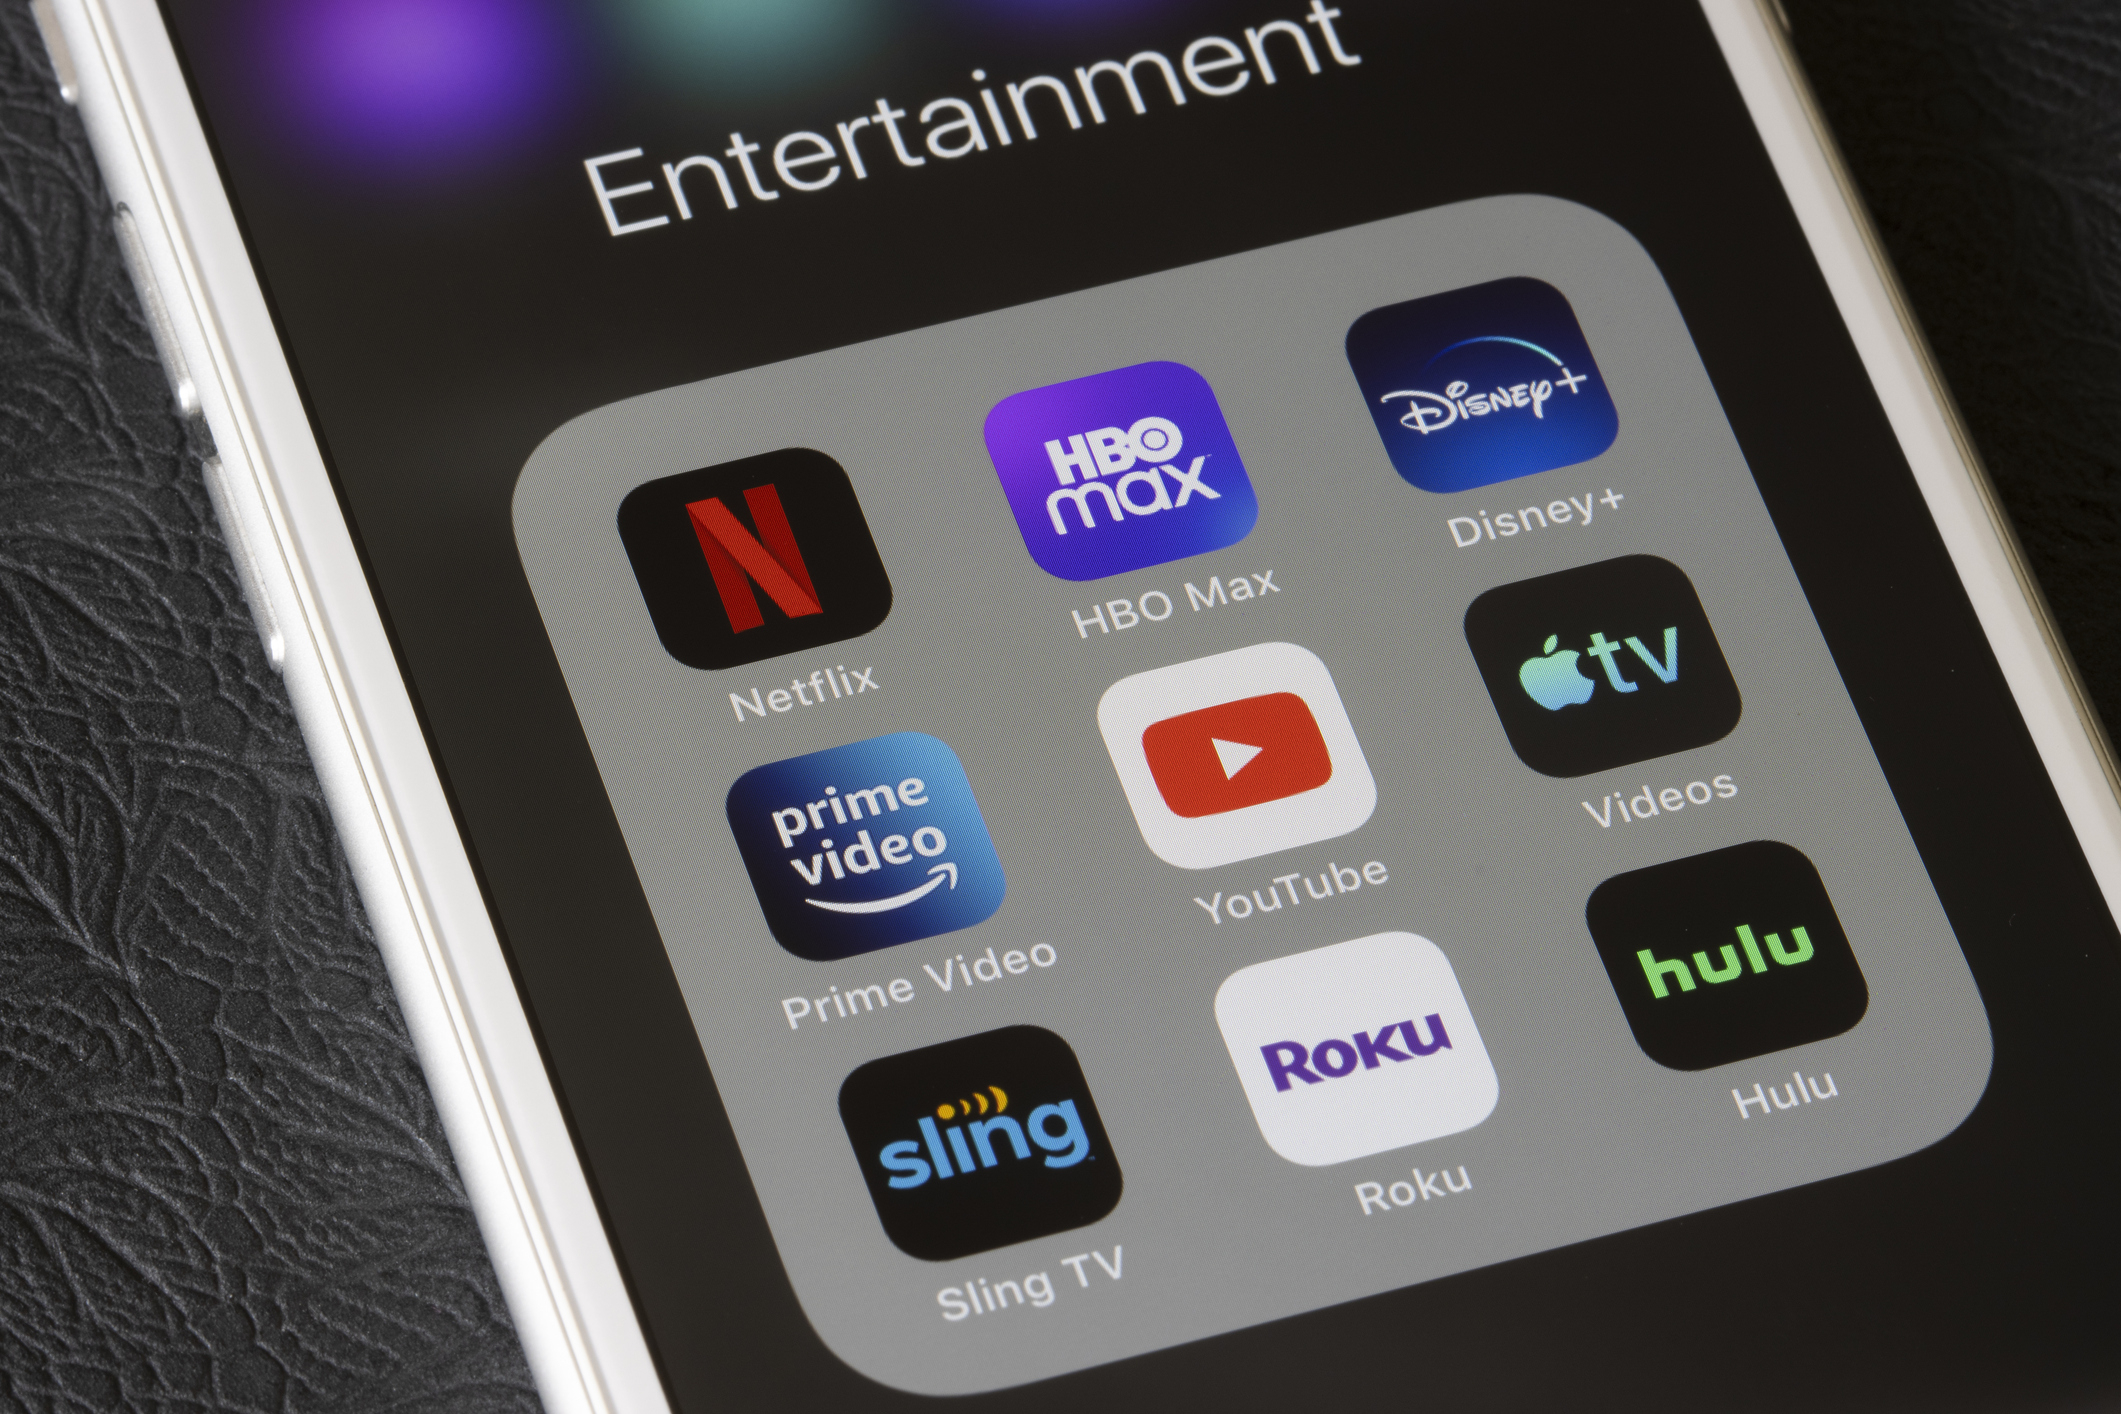 Close-up of a smartphone screen showing entertainment app icons like Netflix, HBO Max, Disney+, and others